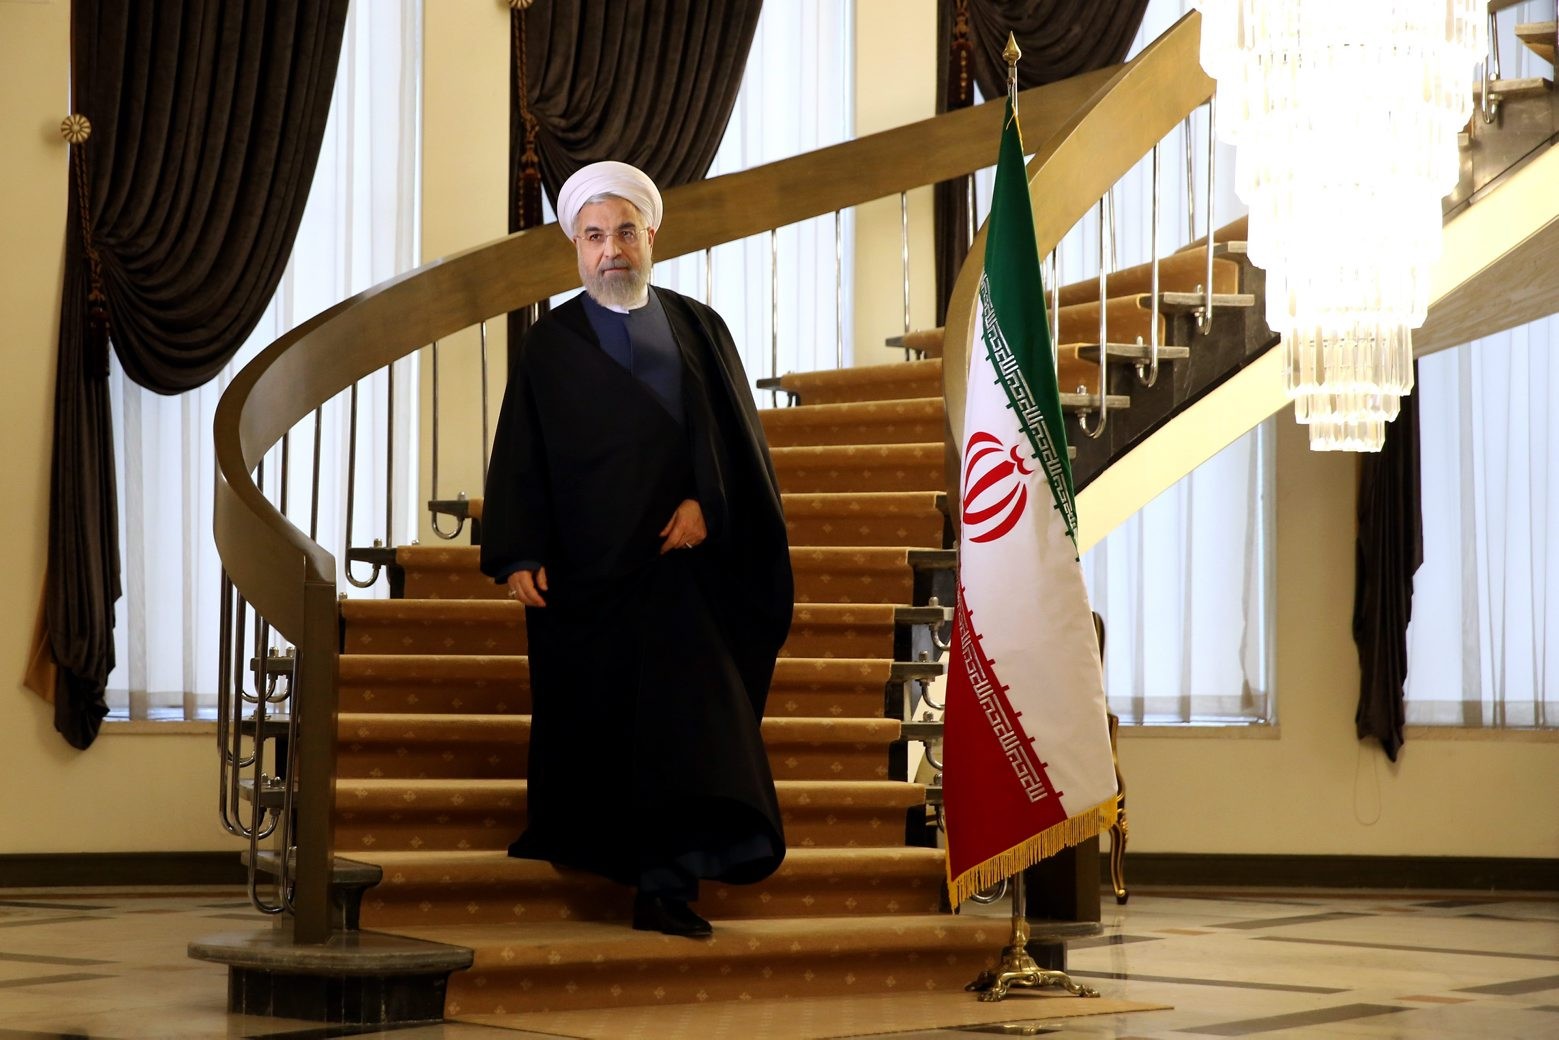 Iranian President Hassan Rouhani arrives for a news briefing at the Saadabad palace in Tehran, Iran, Friday April 3, 2015. Rouhani on Friday pledged that his nation will abide by its commitments in the nuclear agreement reached the previous day in Switzerland. (AP Photo/Ebrahim Noroozi) Mideast Iran